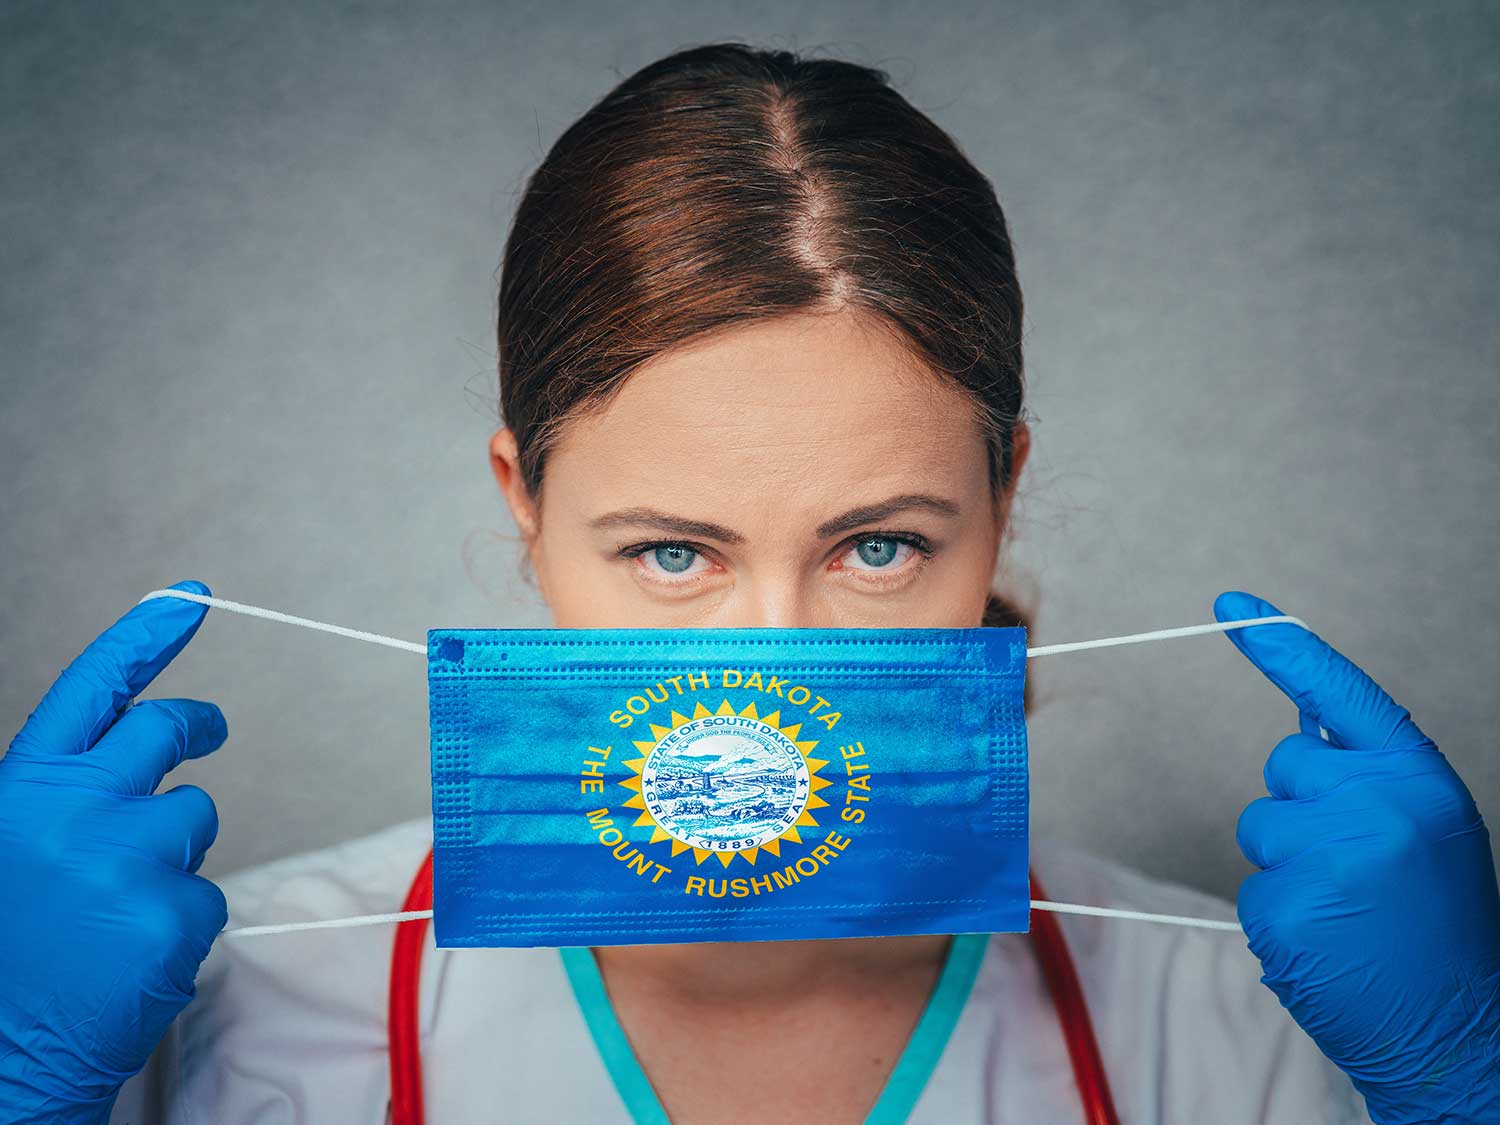 A Female Doctor From South Dakota With Medical Malpractice Insurance Putting On A State Flag Surgical Mask